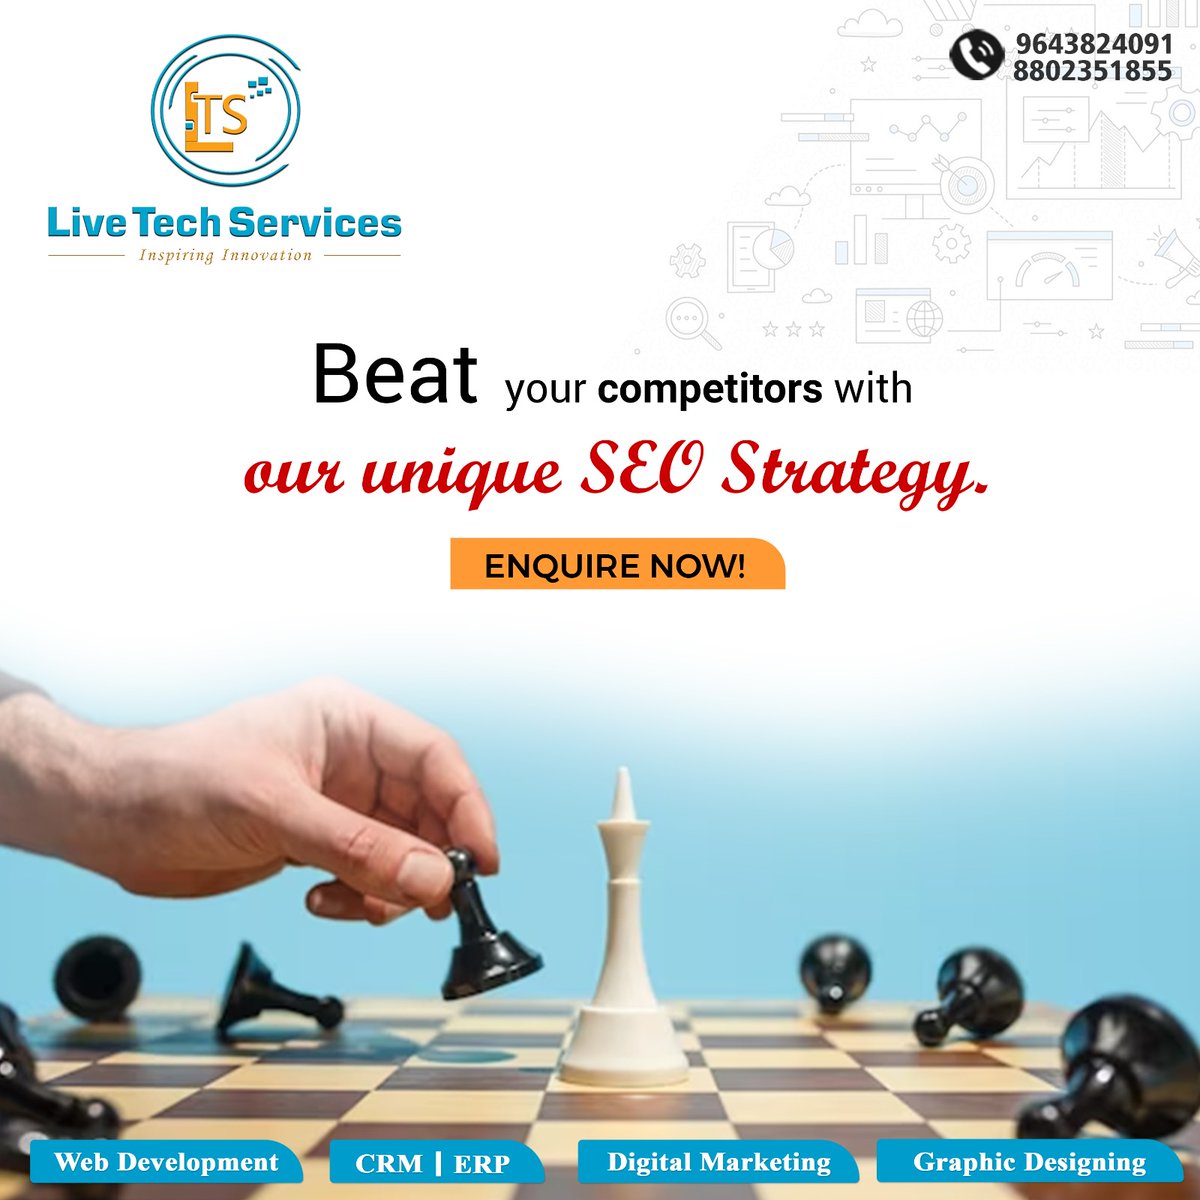 Beat your competitors with us, We make you Stand Ahead of your Business online with Advanced SEO!

Website-livetechservices.in
Phone: 9643824091, 8802351855
Email- info@livetechservices.in

#livetechservices #StandOut #businessonline #AdvancedSEO #digitalmarketing #SEO